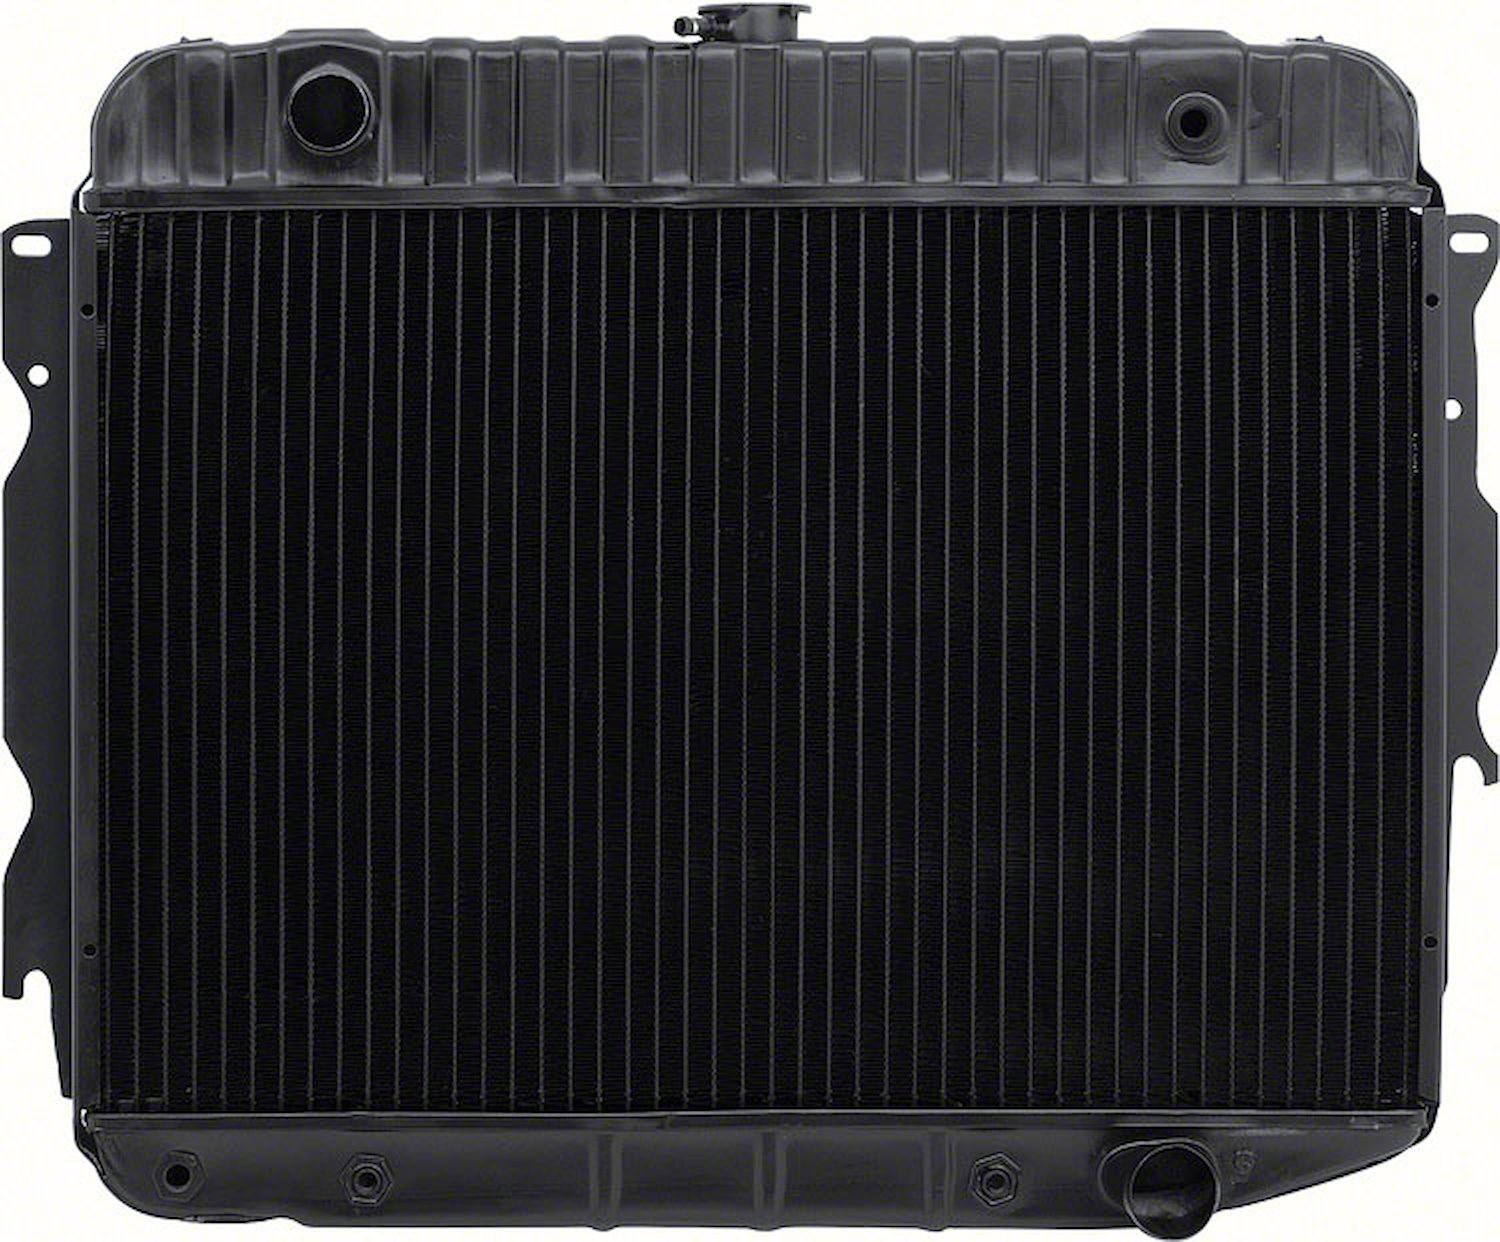 MD2293A Replacement Radiator 1973 Mopar B/E-Body Big Block V8 With Automatic Trans 3 Row 22" Wide